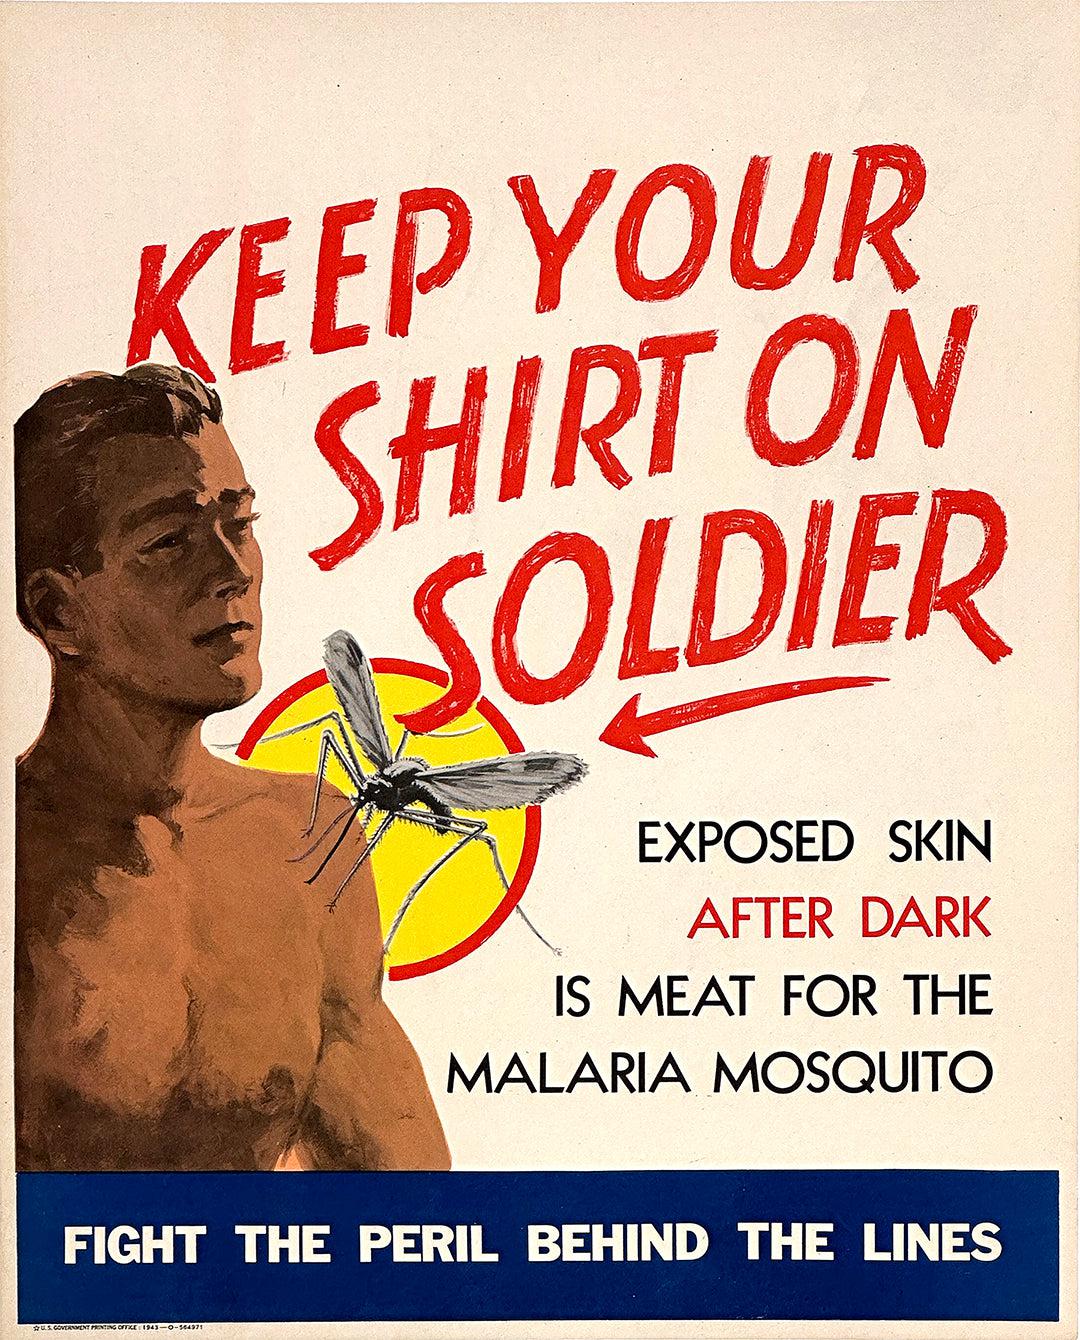 Original Vintage Anti Malaria WWII Poster Keep Your Shirt On Soldier 1943